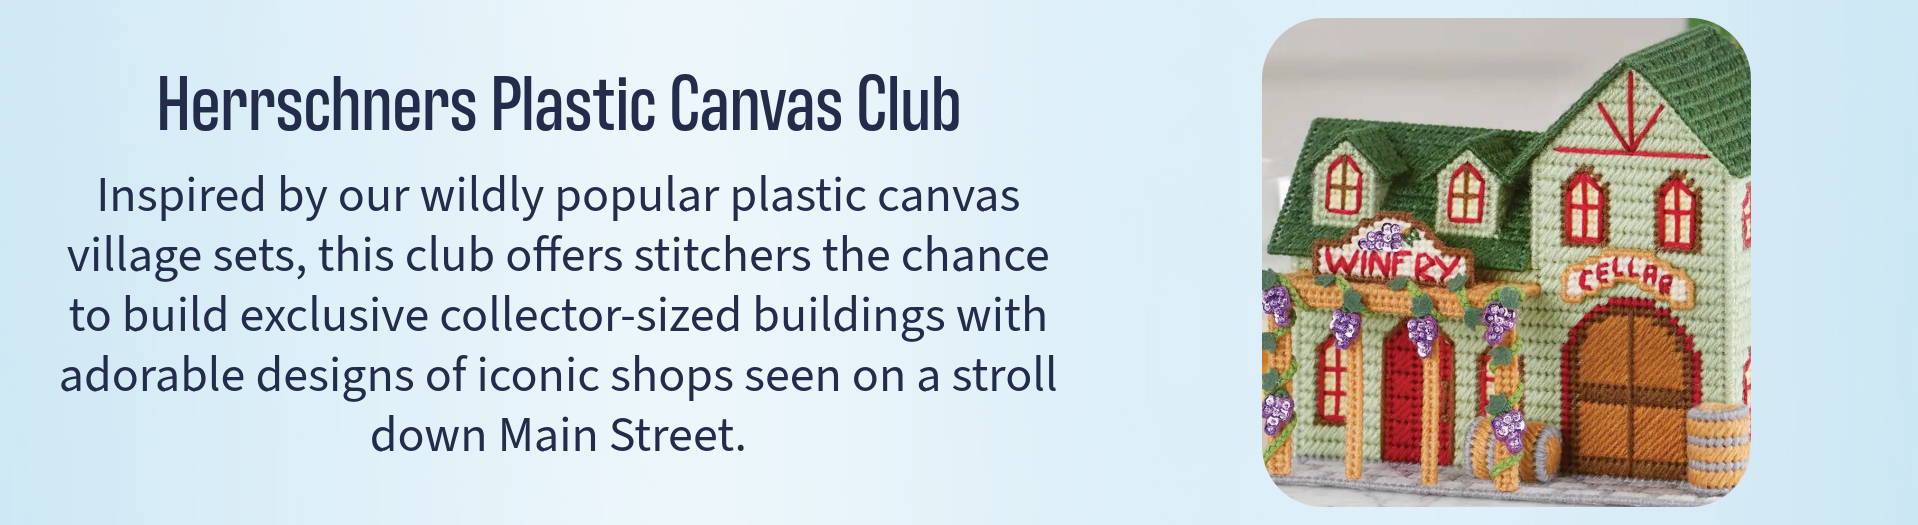 Herrschners Plastic Canvas Club was inspired by our village sets and offers exclusive collector-sized buildings. Image: Plastic Canvas Village Club Kit.